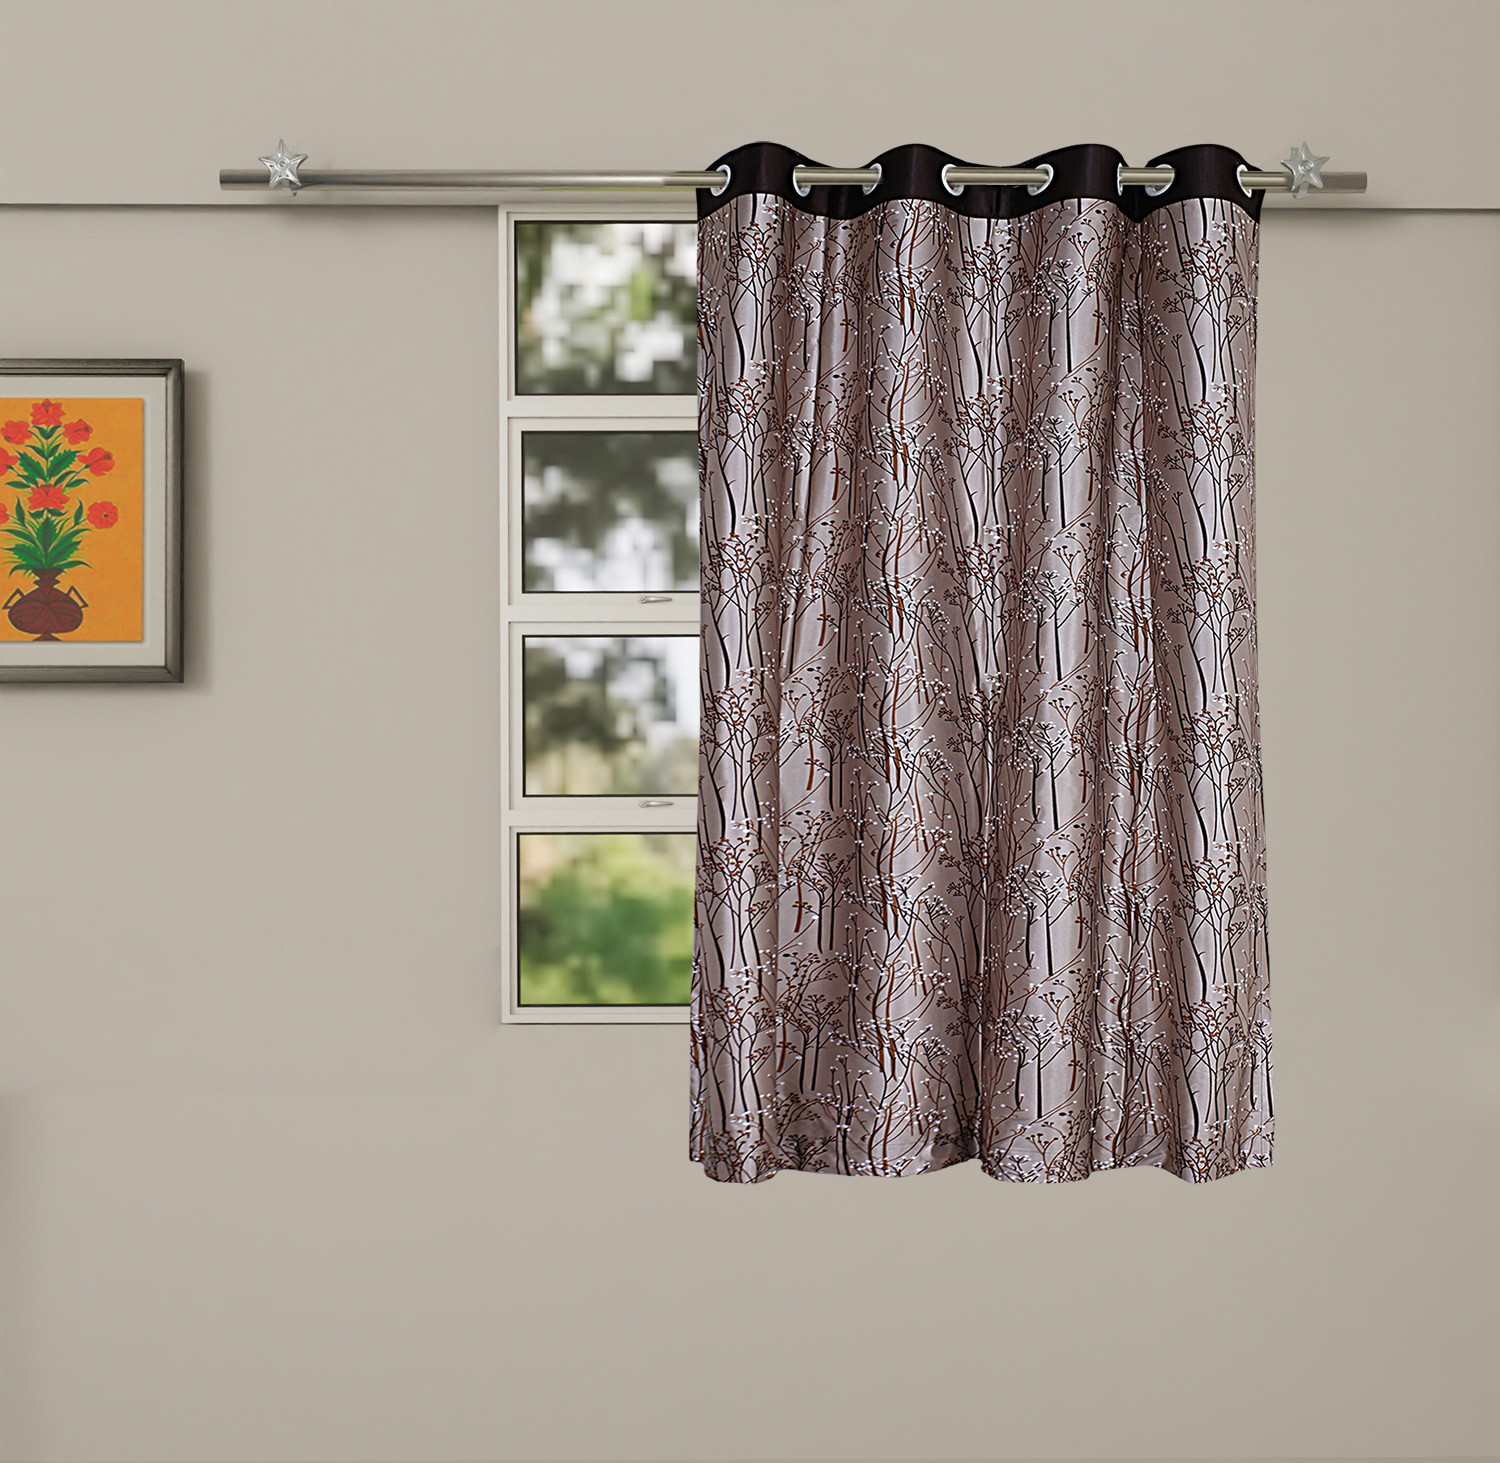 Kuber Industries Polyester Decorative 5 Feet Window Curtain|Tree Branches Print Darkening Blackout|Drapes Curatin With 8 Eyelet For Home & Office (Coffee)